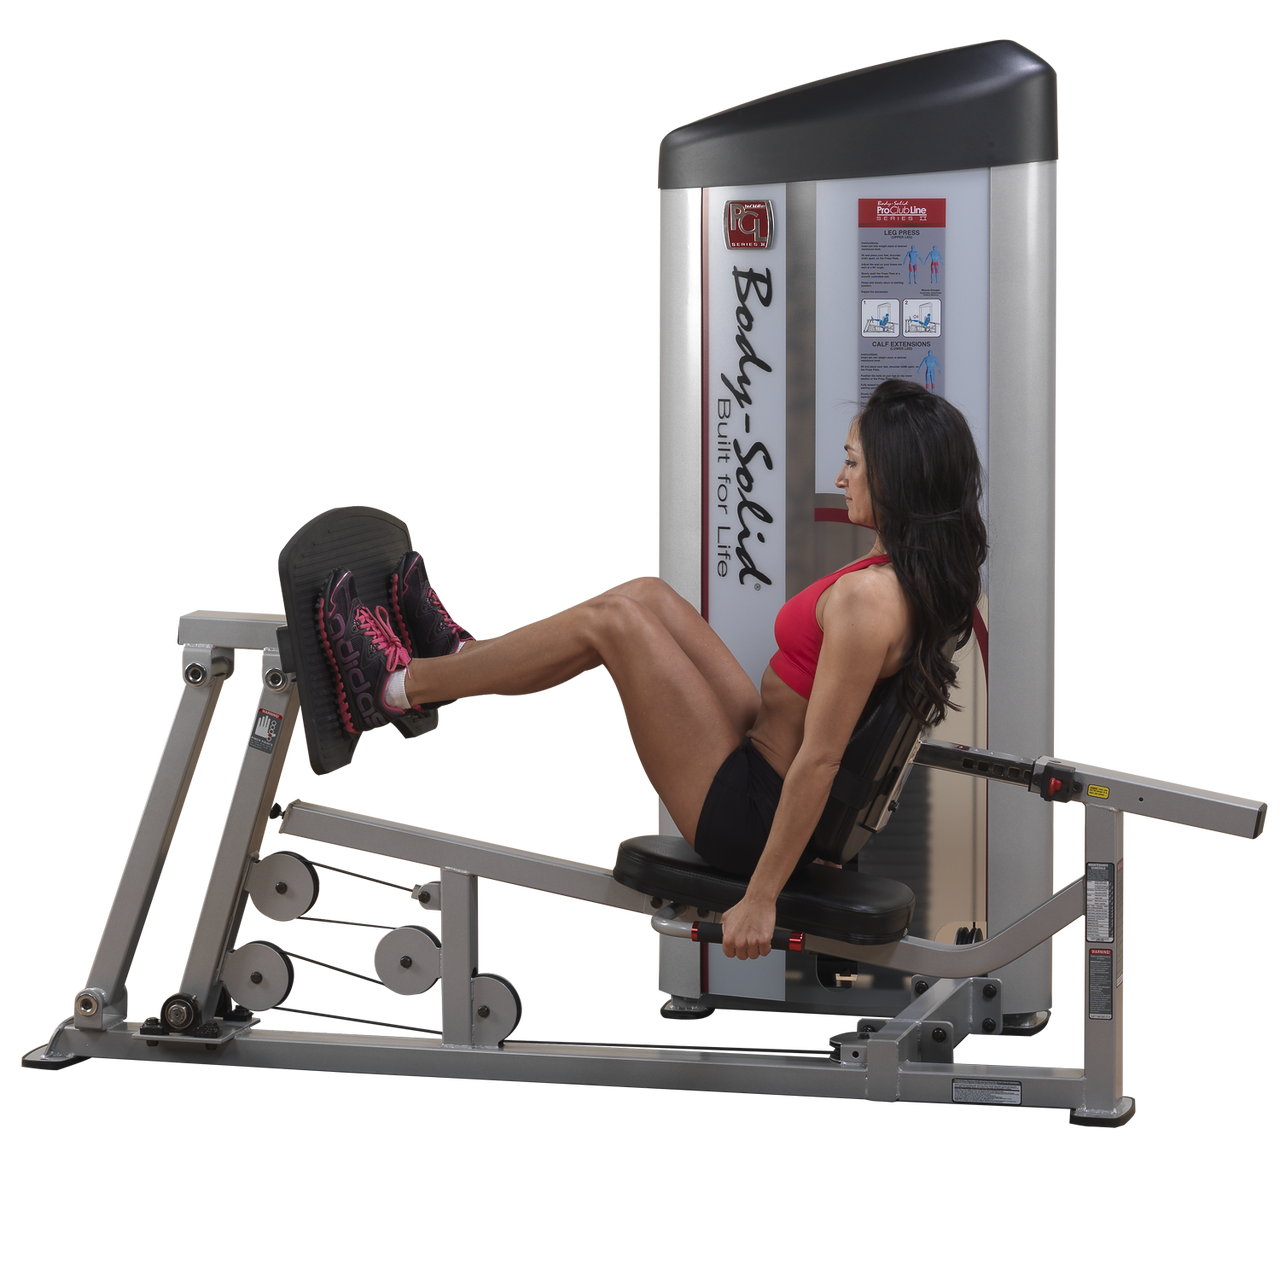 How to set up the leg press machine to get the best results - Human Movement